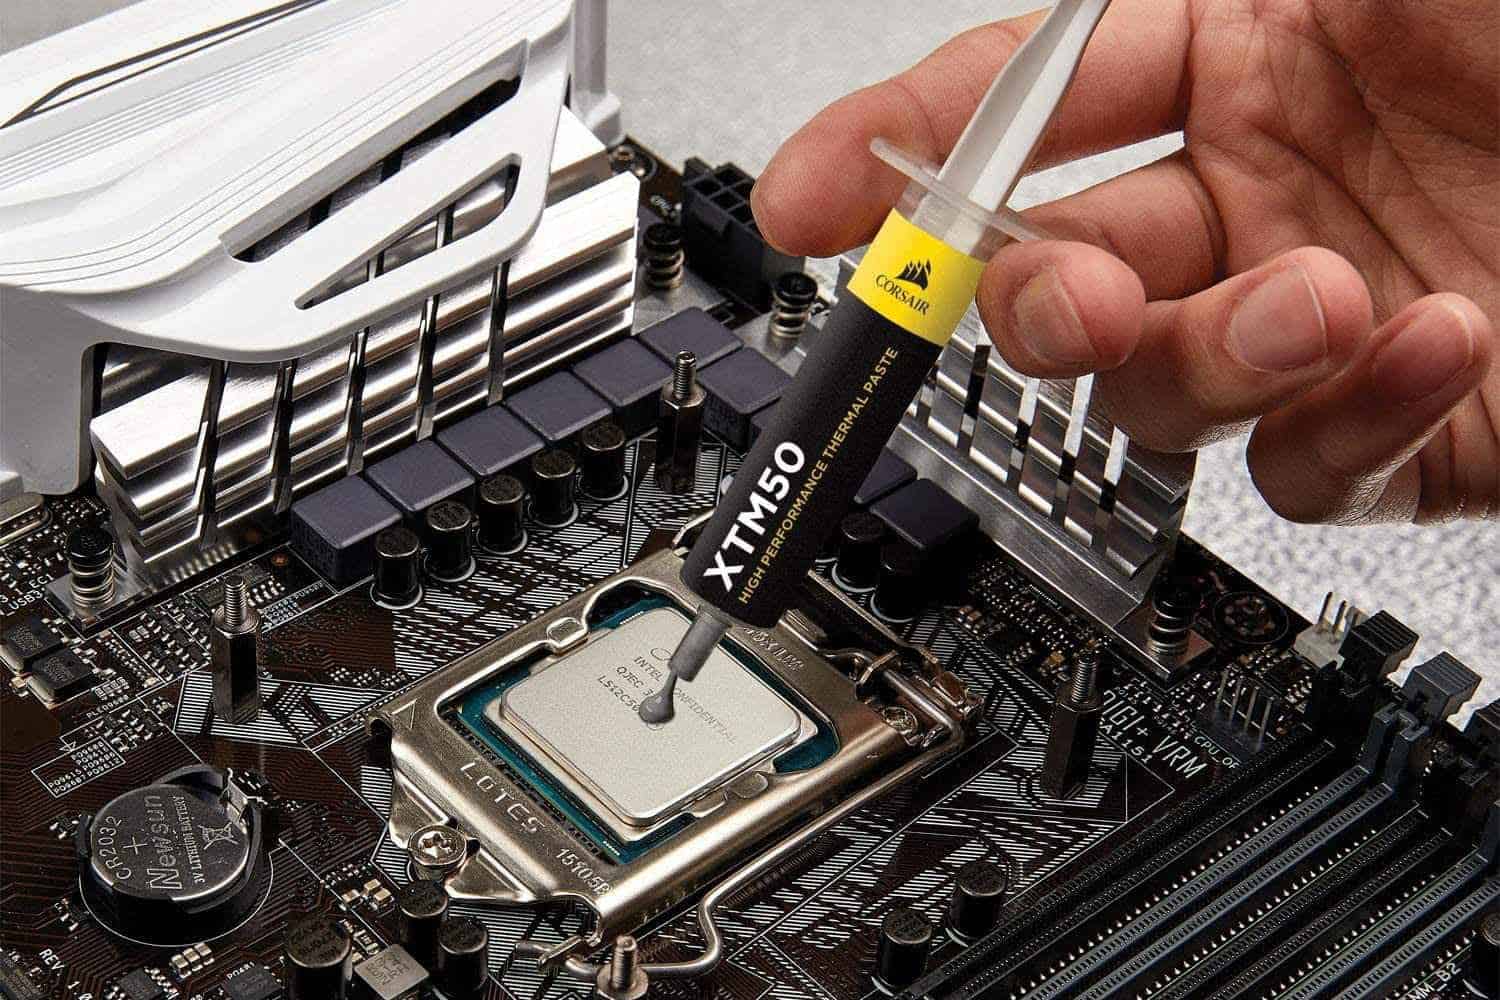 How Long Does Thermal Paste Last?